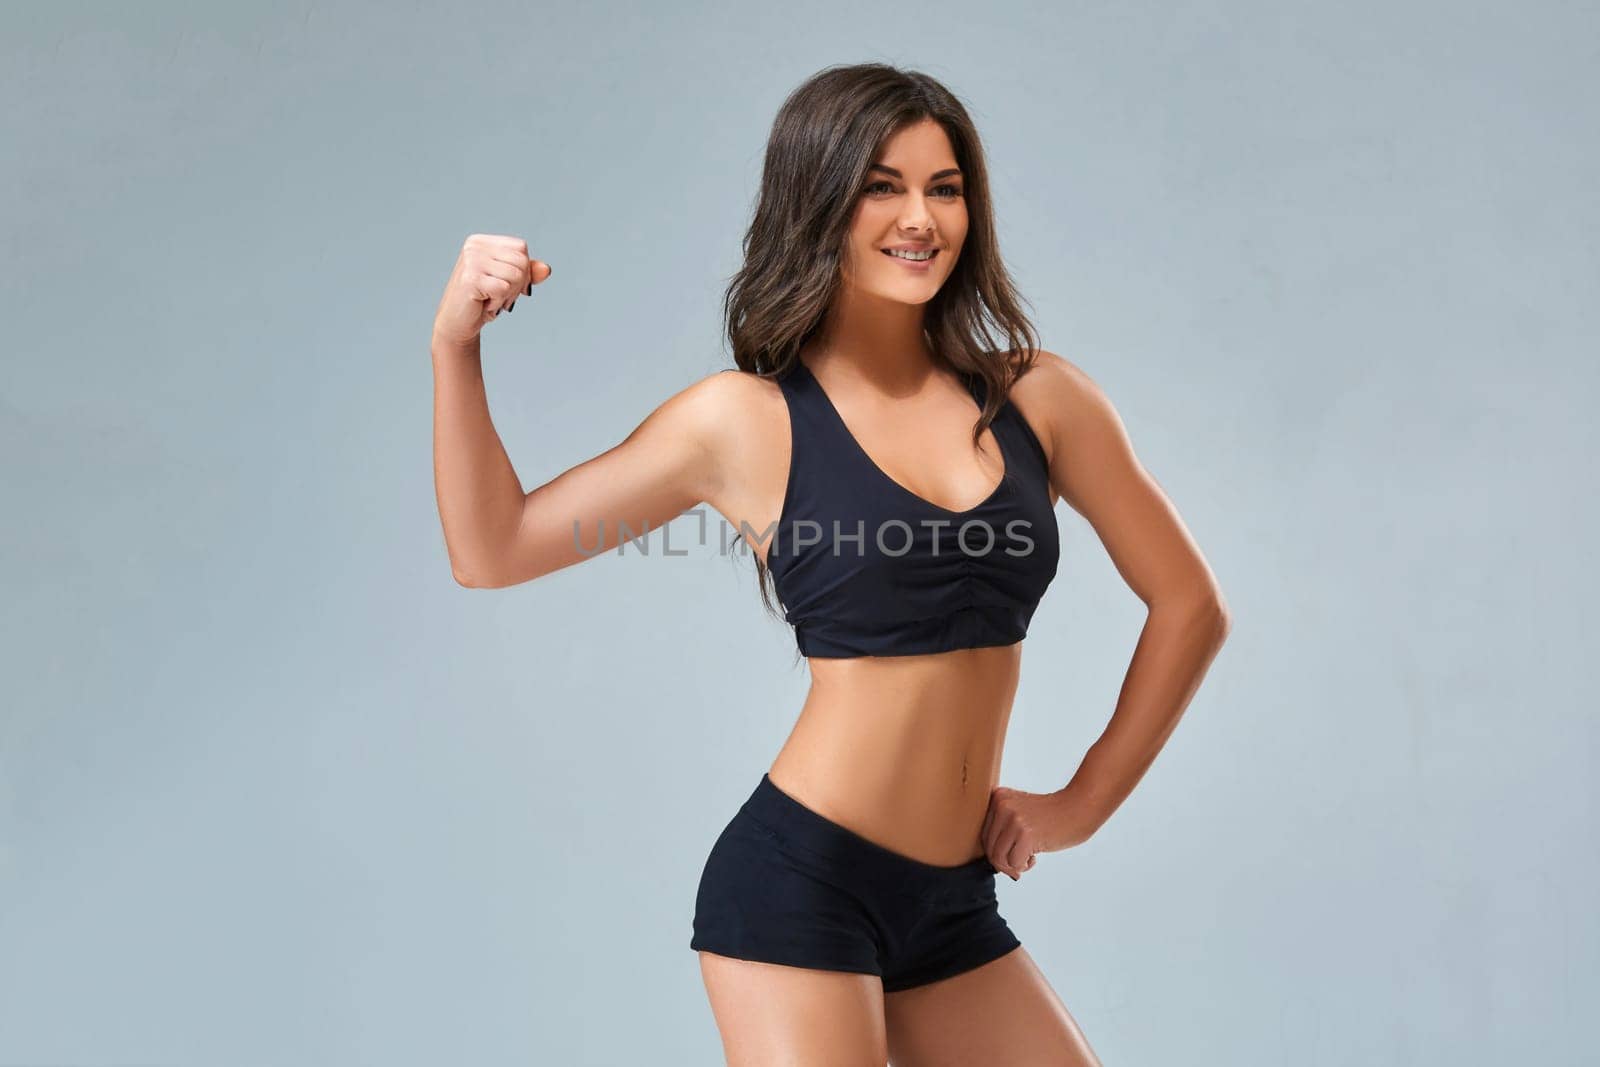 the sports and beautiful young girl on a gray background. The lovely girl with a sports figure and a beautiful smile. The beautiful girl in a topic poses and shows press.